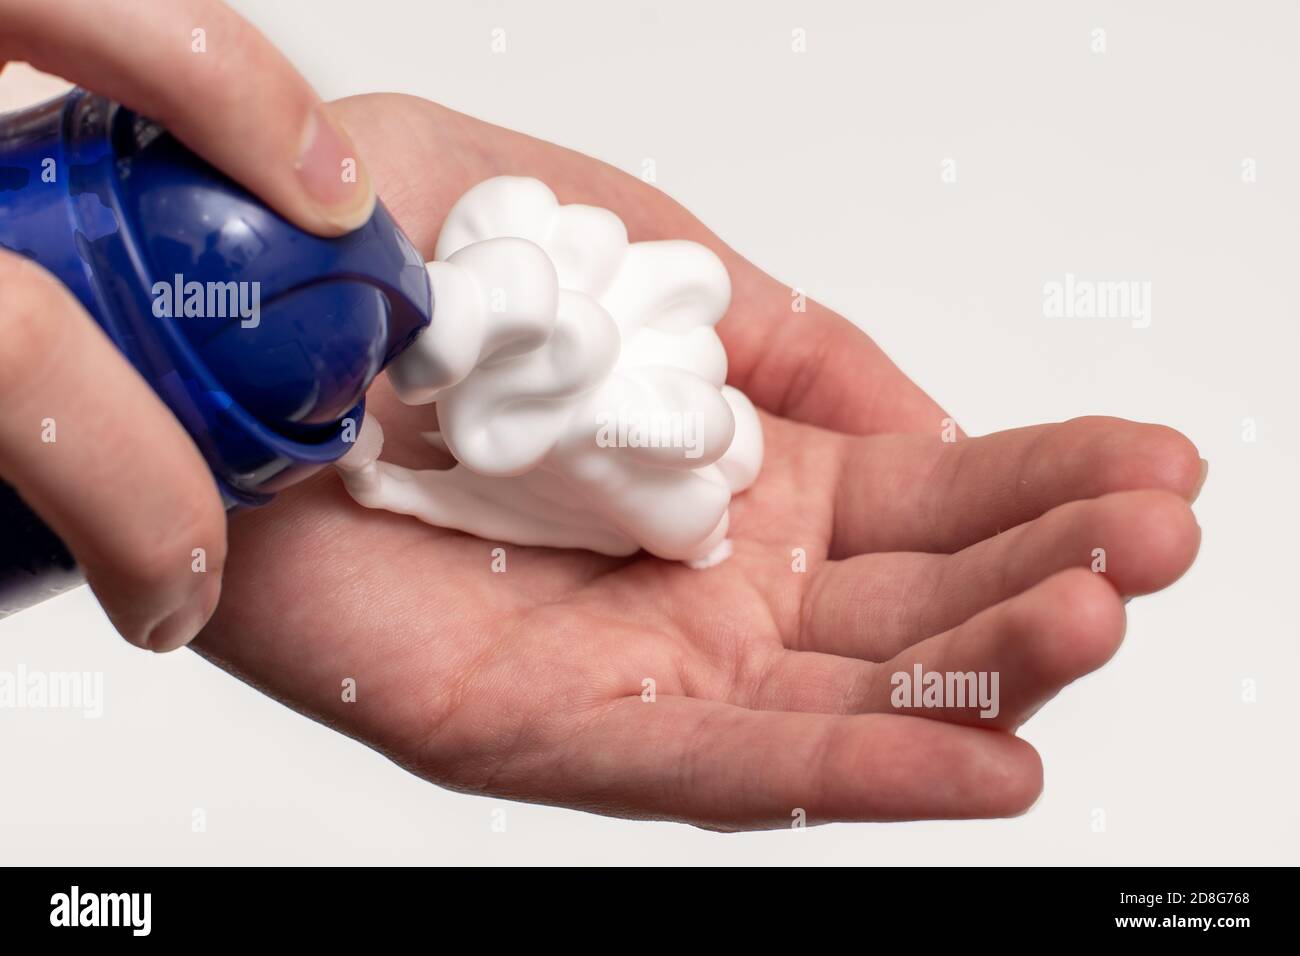 A close-up of a female hand squeezing foam in the palm of a hand. Place soap foam with foam on hand Stock Photo